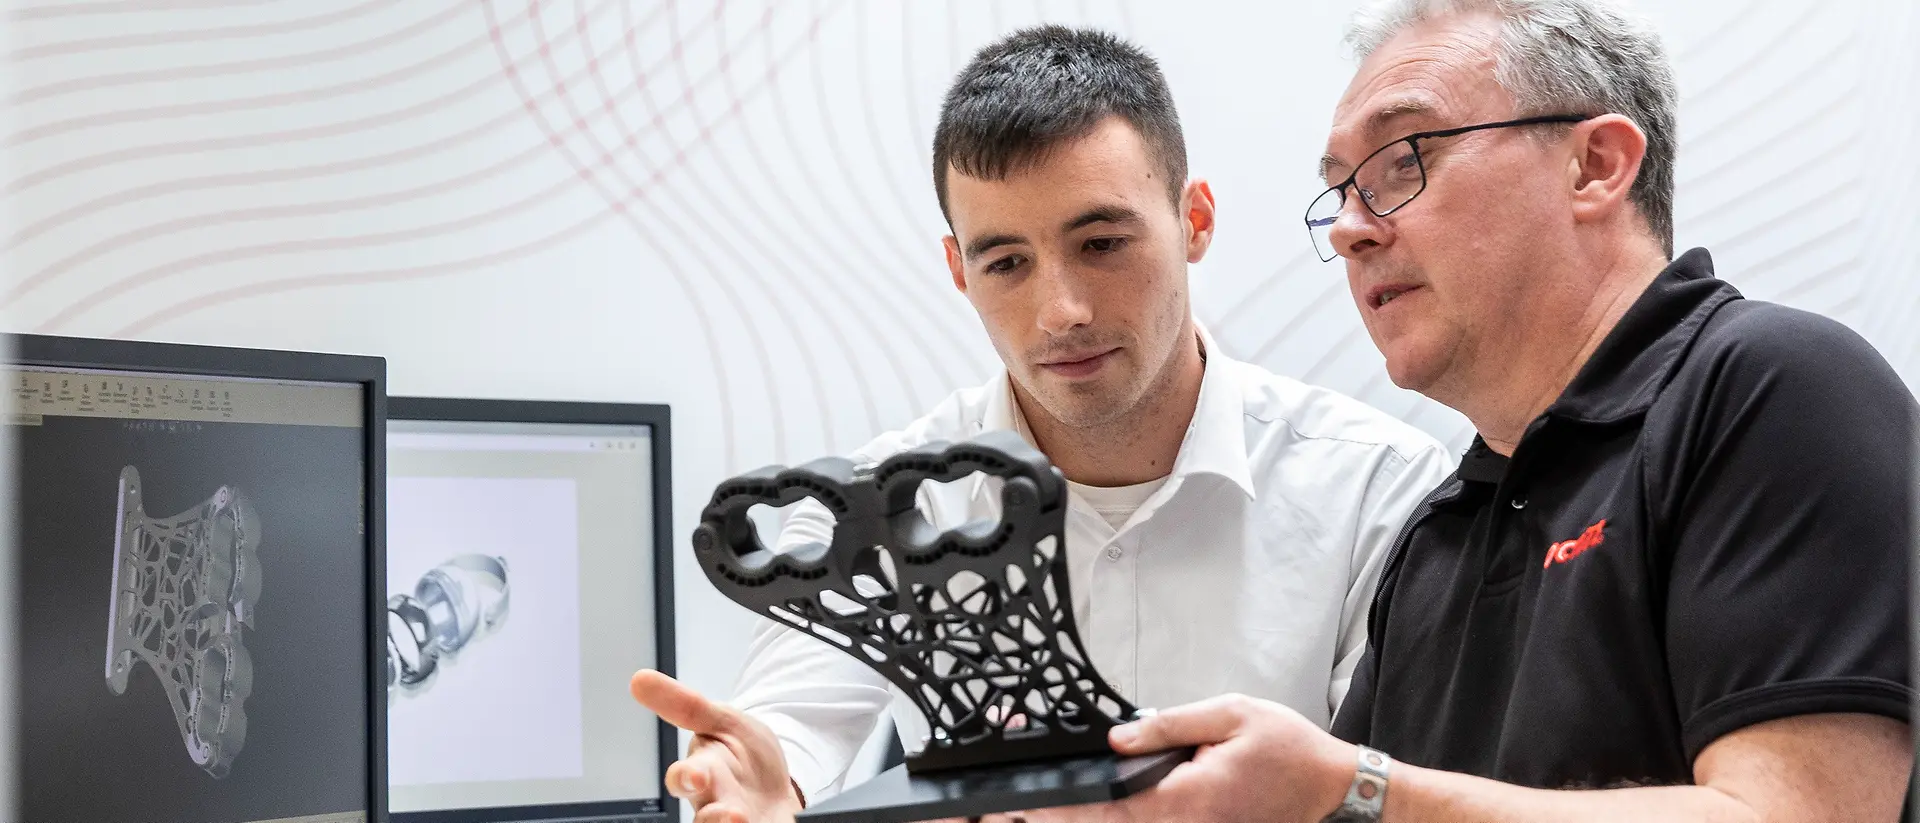 
Henkel engineers are working with customers in the automotive and industrial sectors to optimize 3D printed parts.